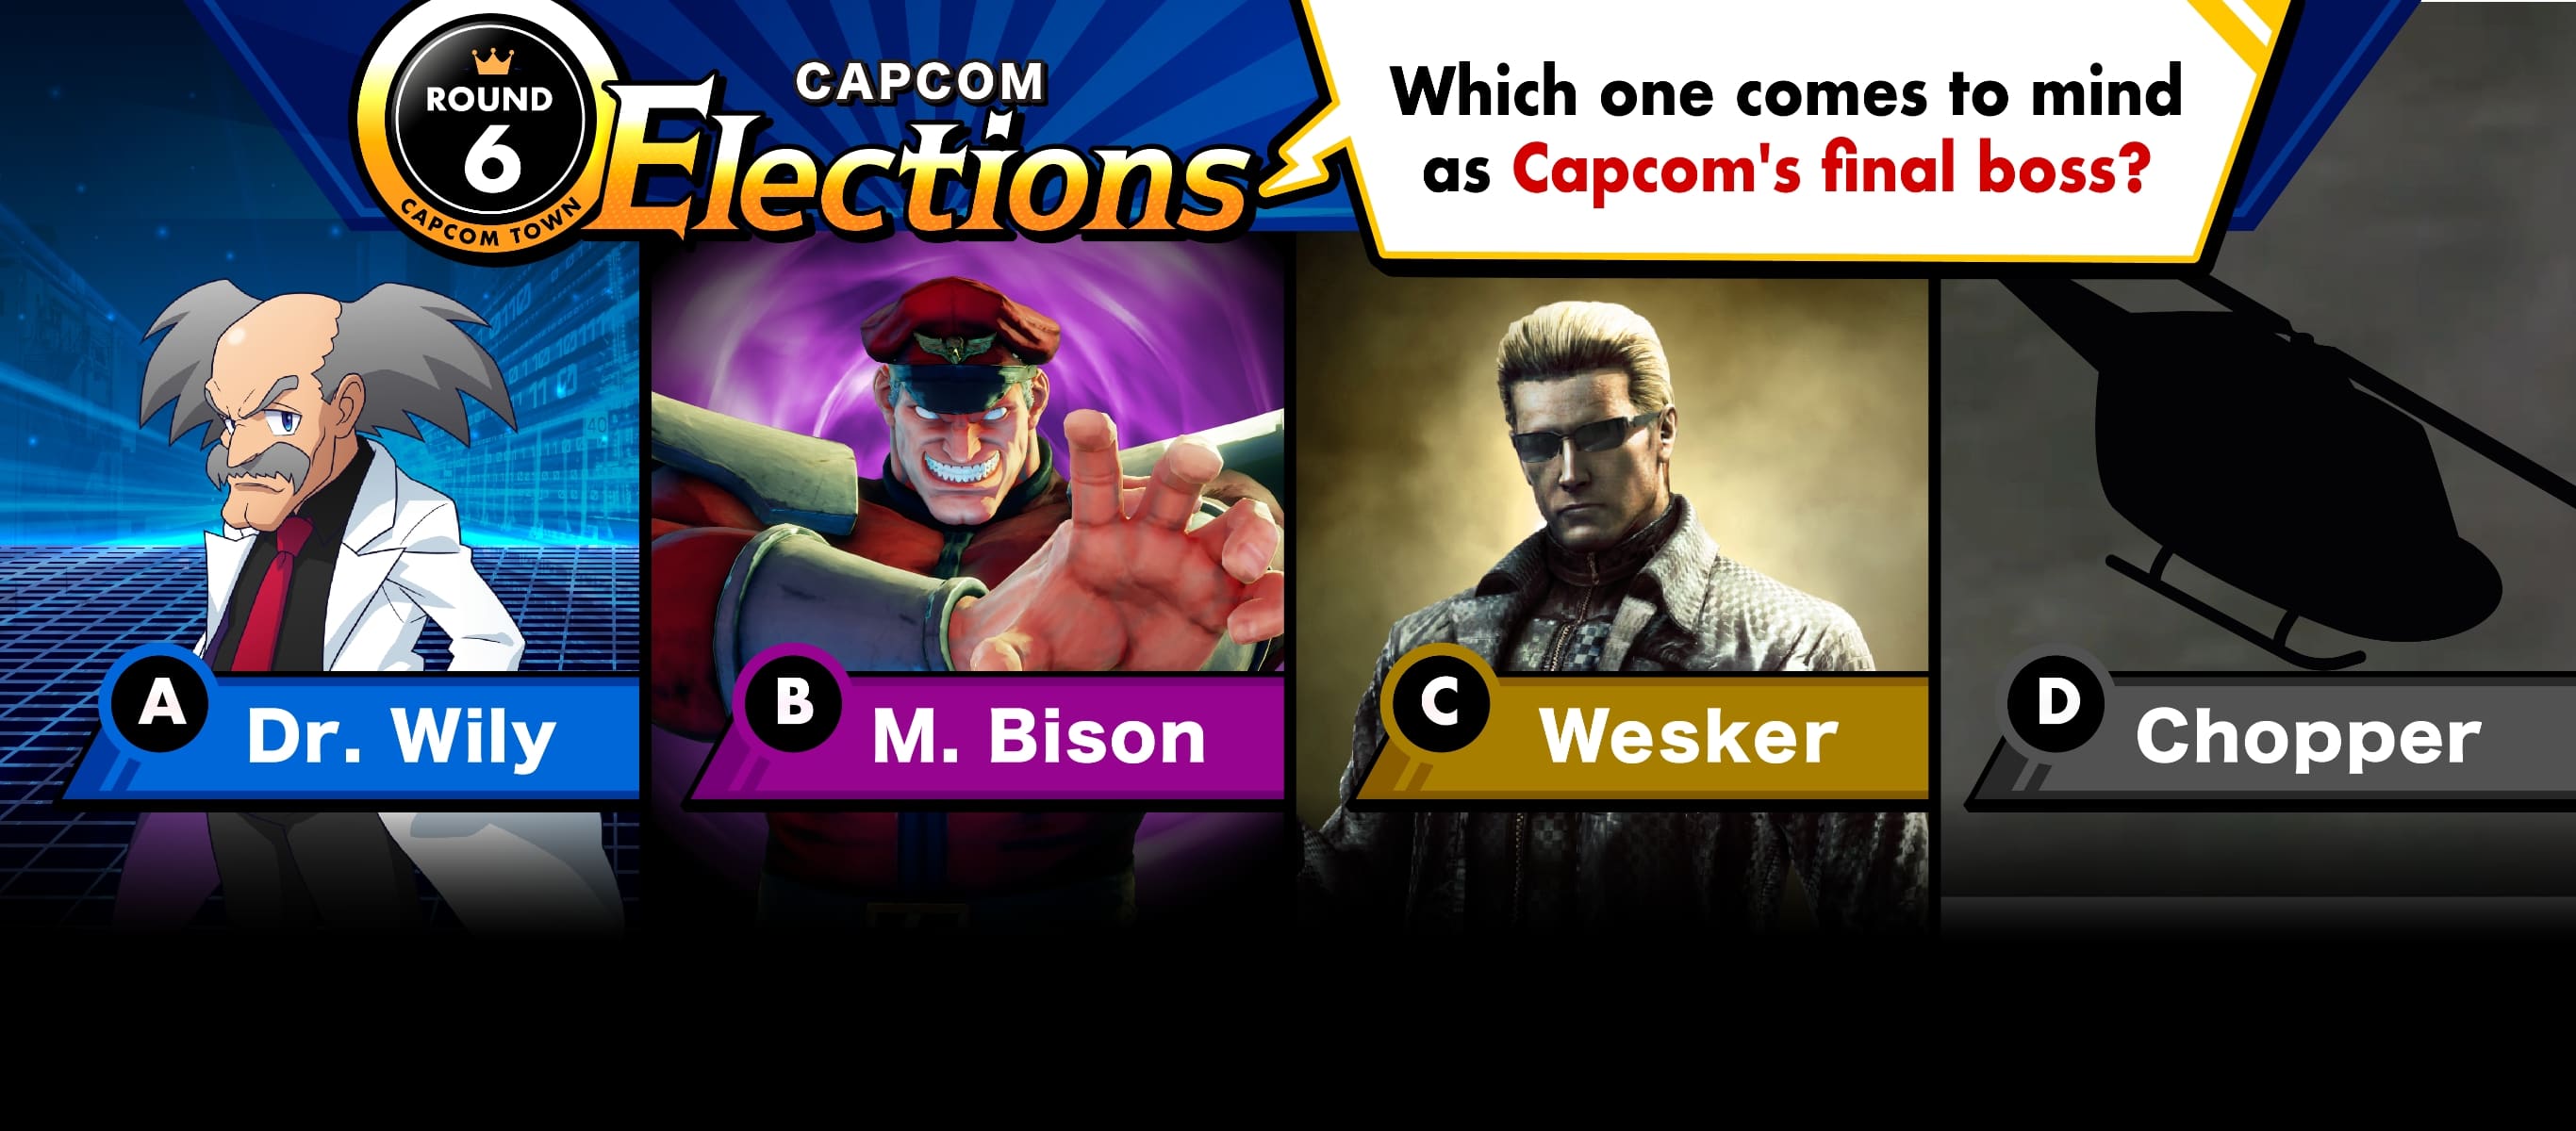 Capcom Elections: Round 6 Which one comes to mind as Capcom's final boss?